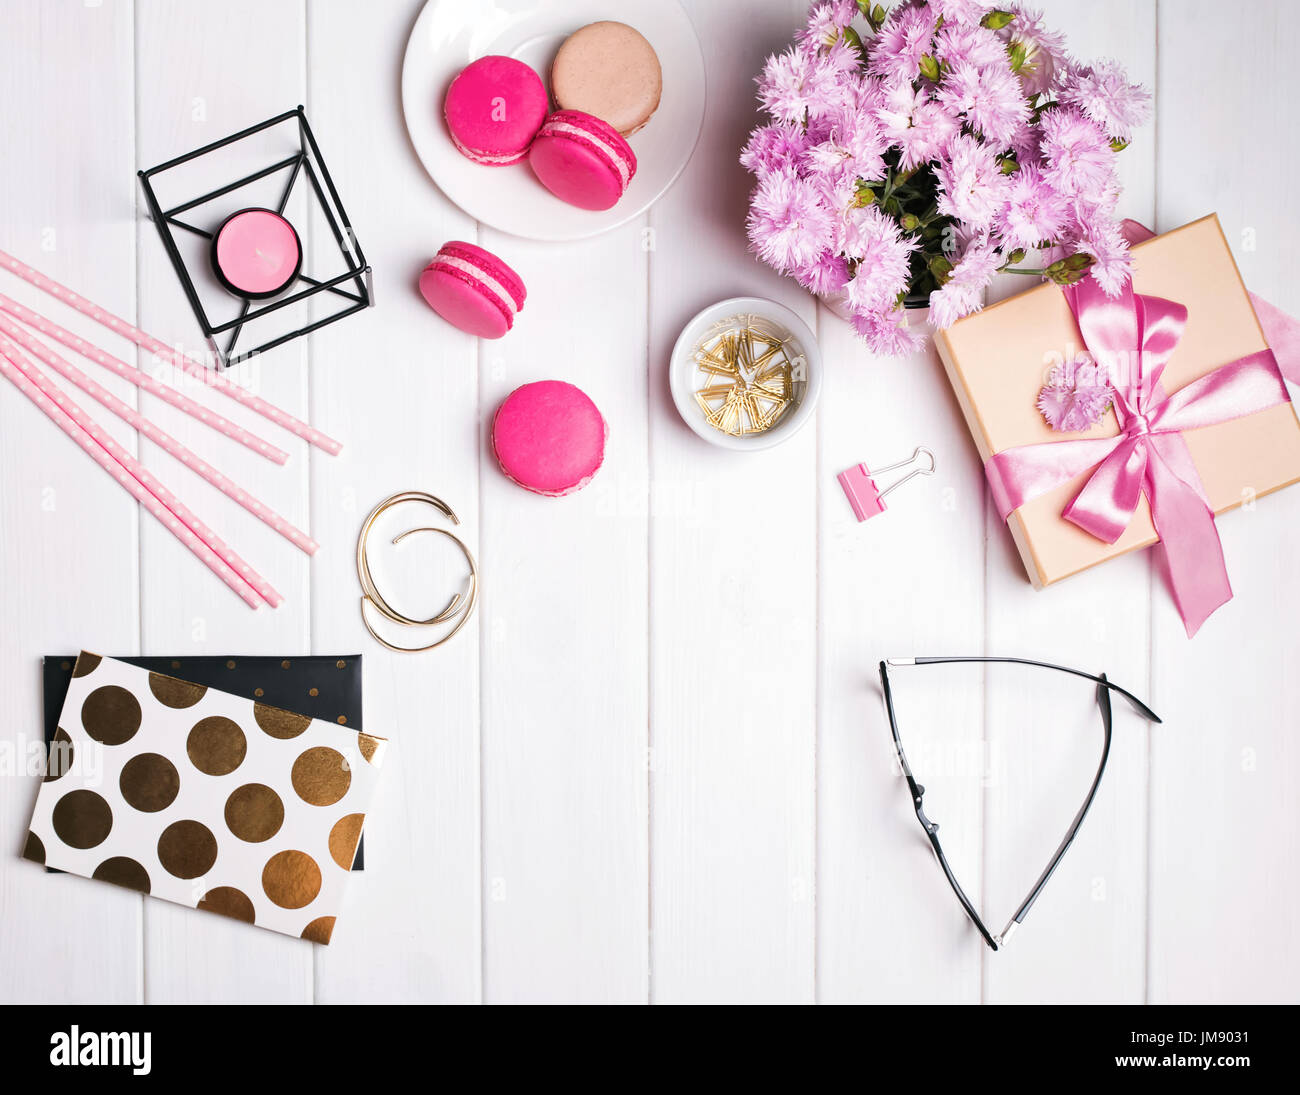 Pink flowers, macarons, candle, glasses and other cute small feminine accessories on the white wooden table Stock Photo